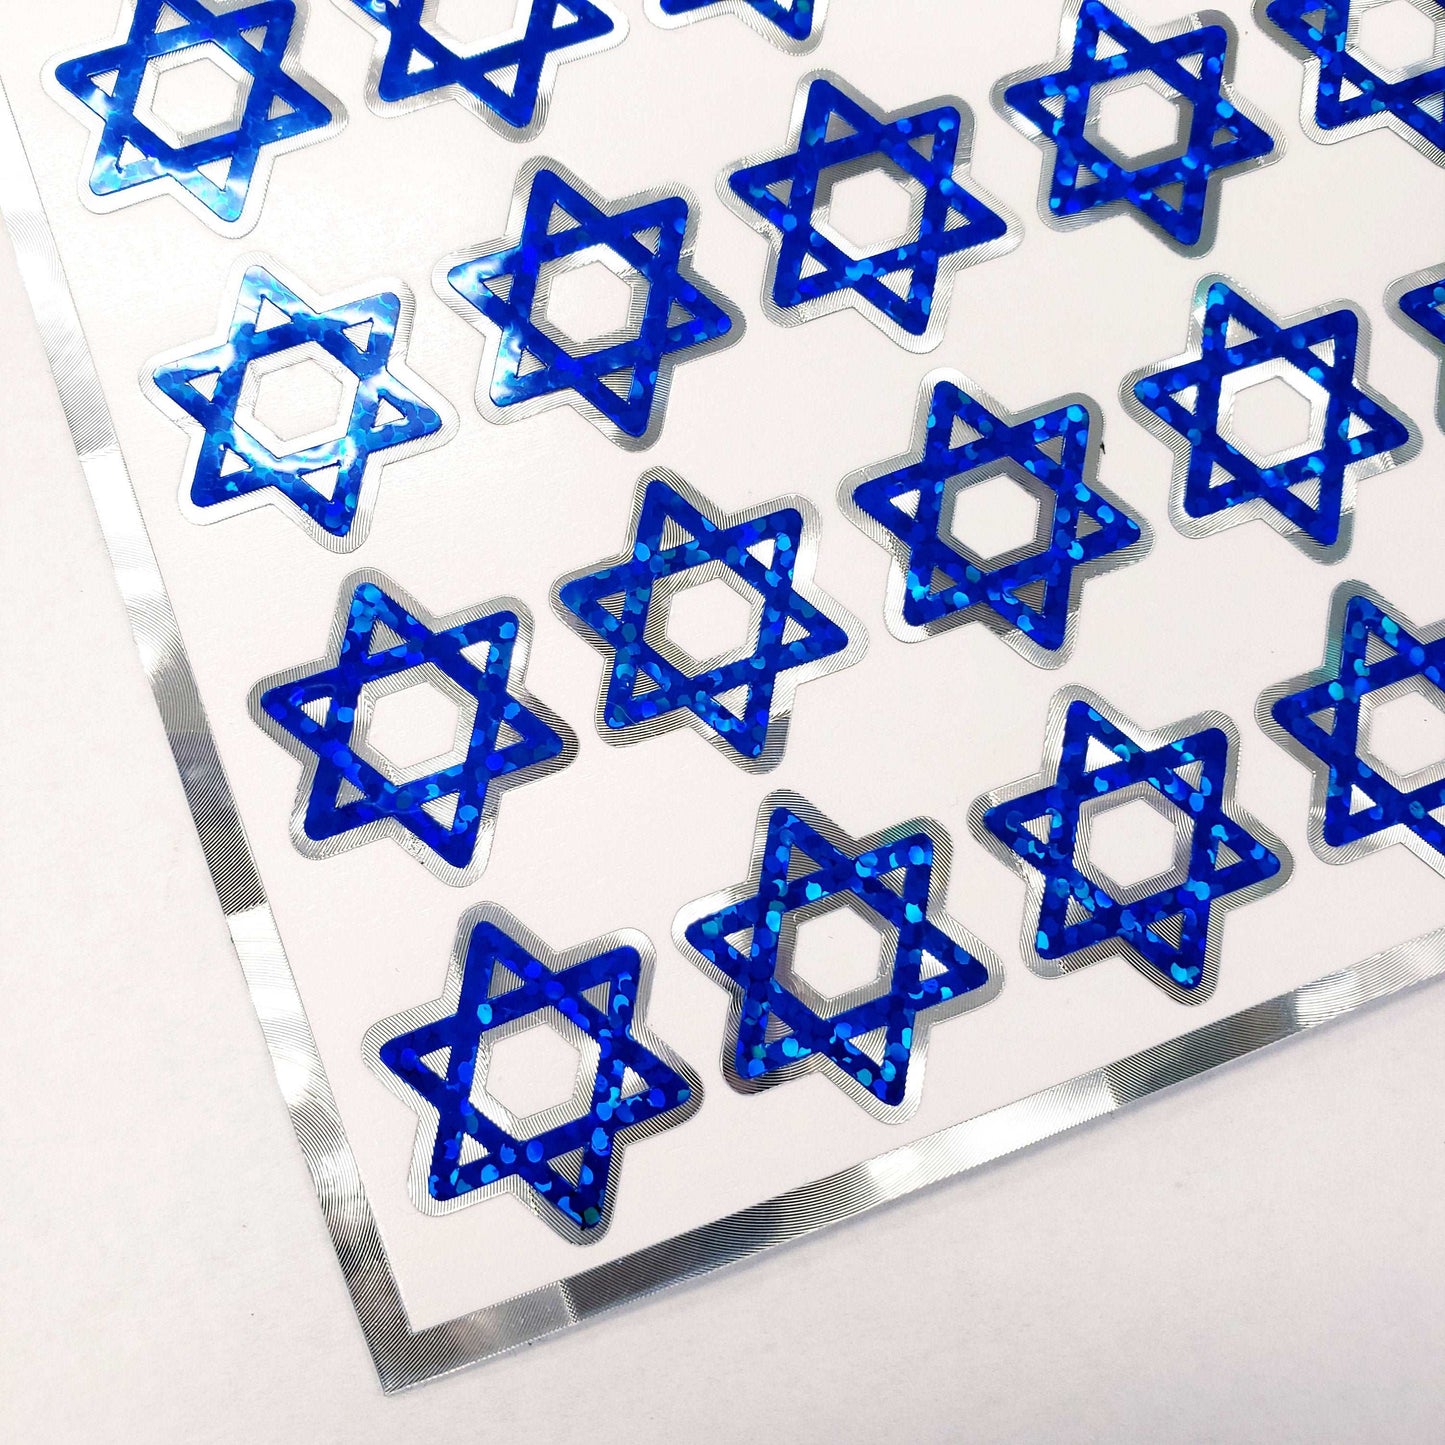 Star of David Stickers, set of 40 sparkly blue and silver six-point star stickers for cards, invitations, Hanukkah, Bar & Bat Mitzvah stars.